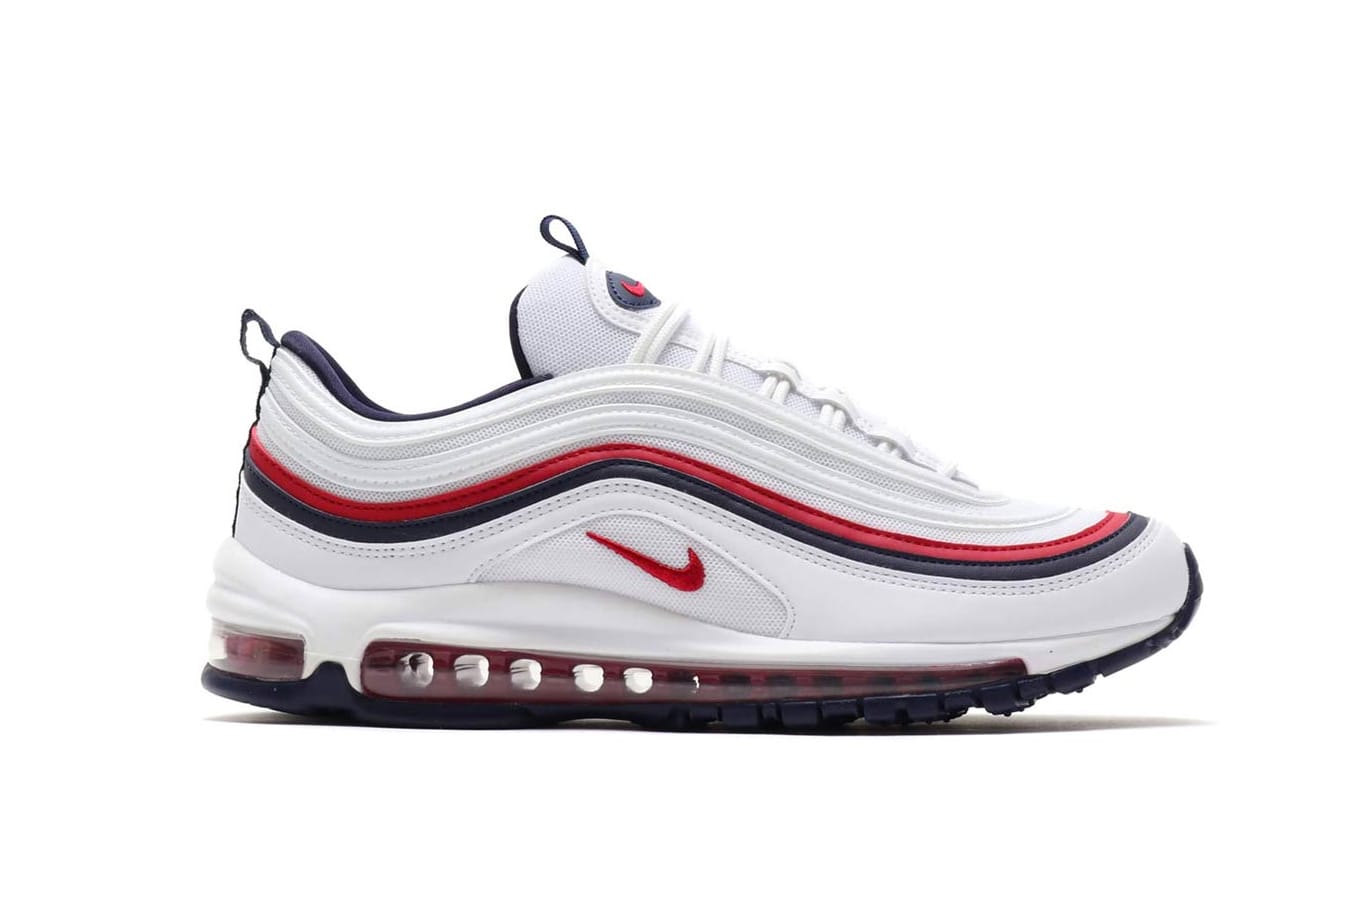 Nike's Air Max 97 Arrives in \